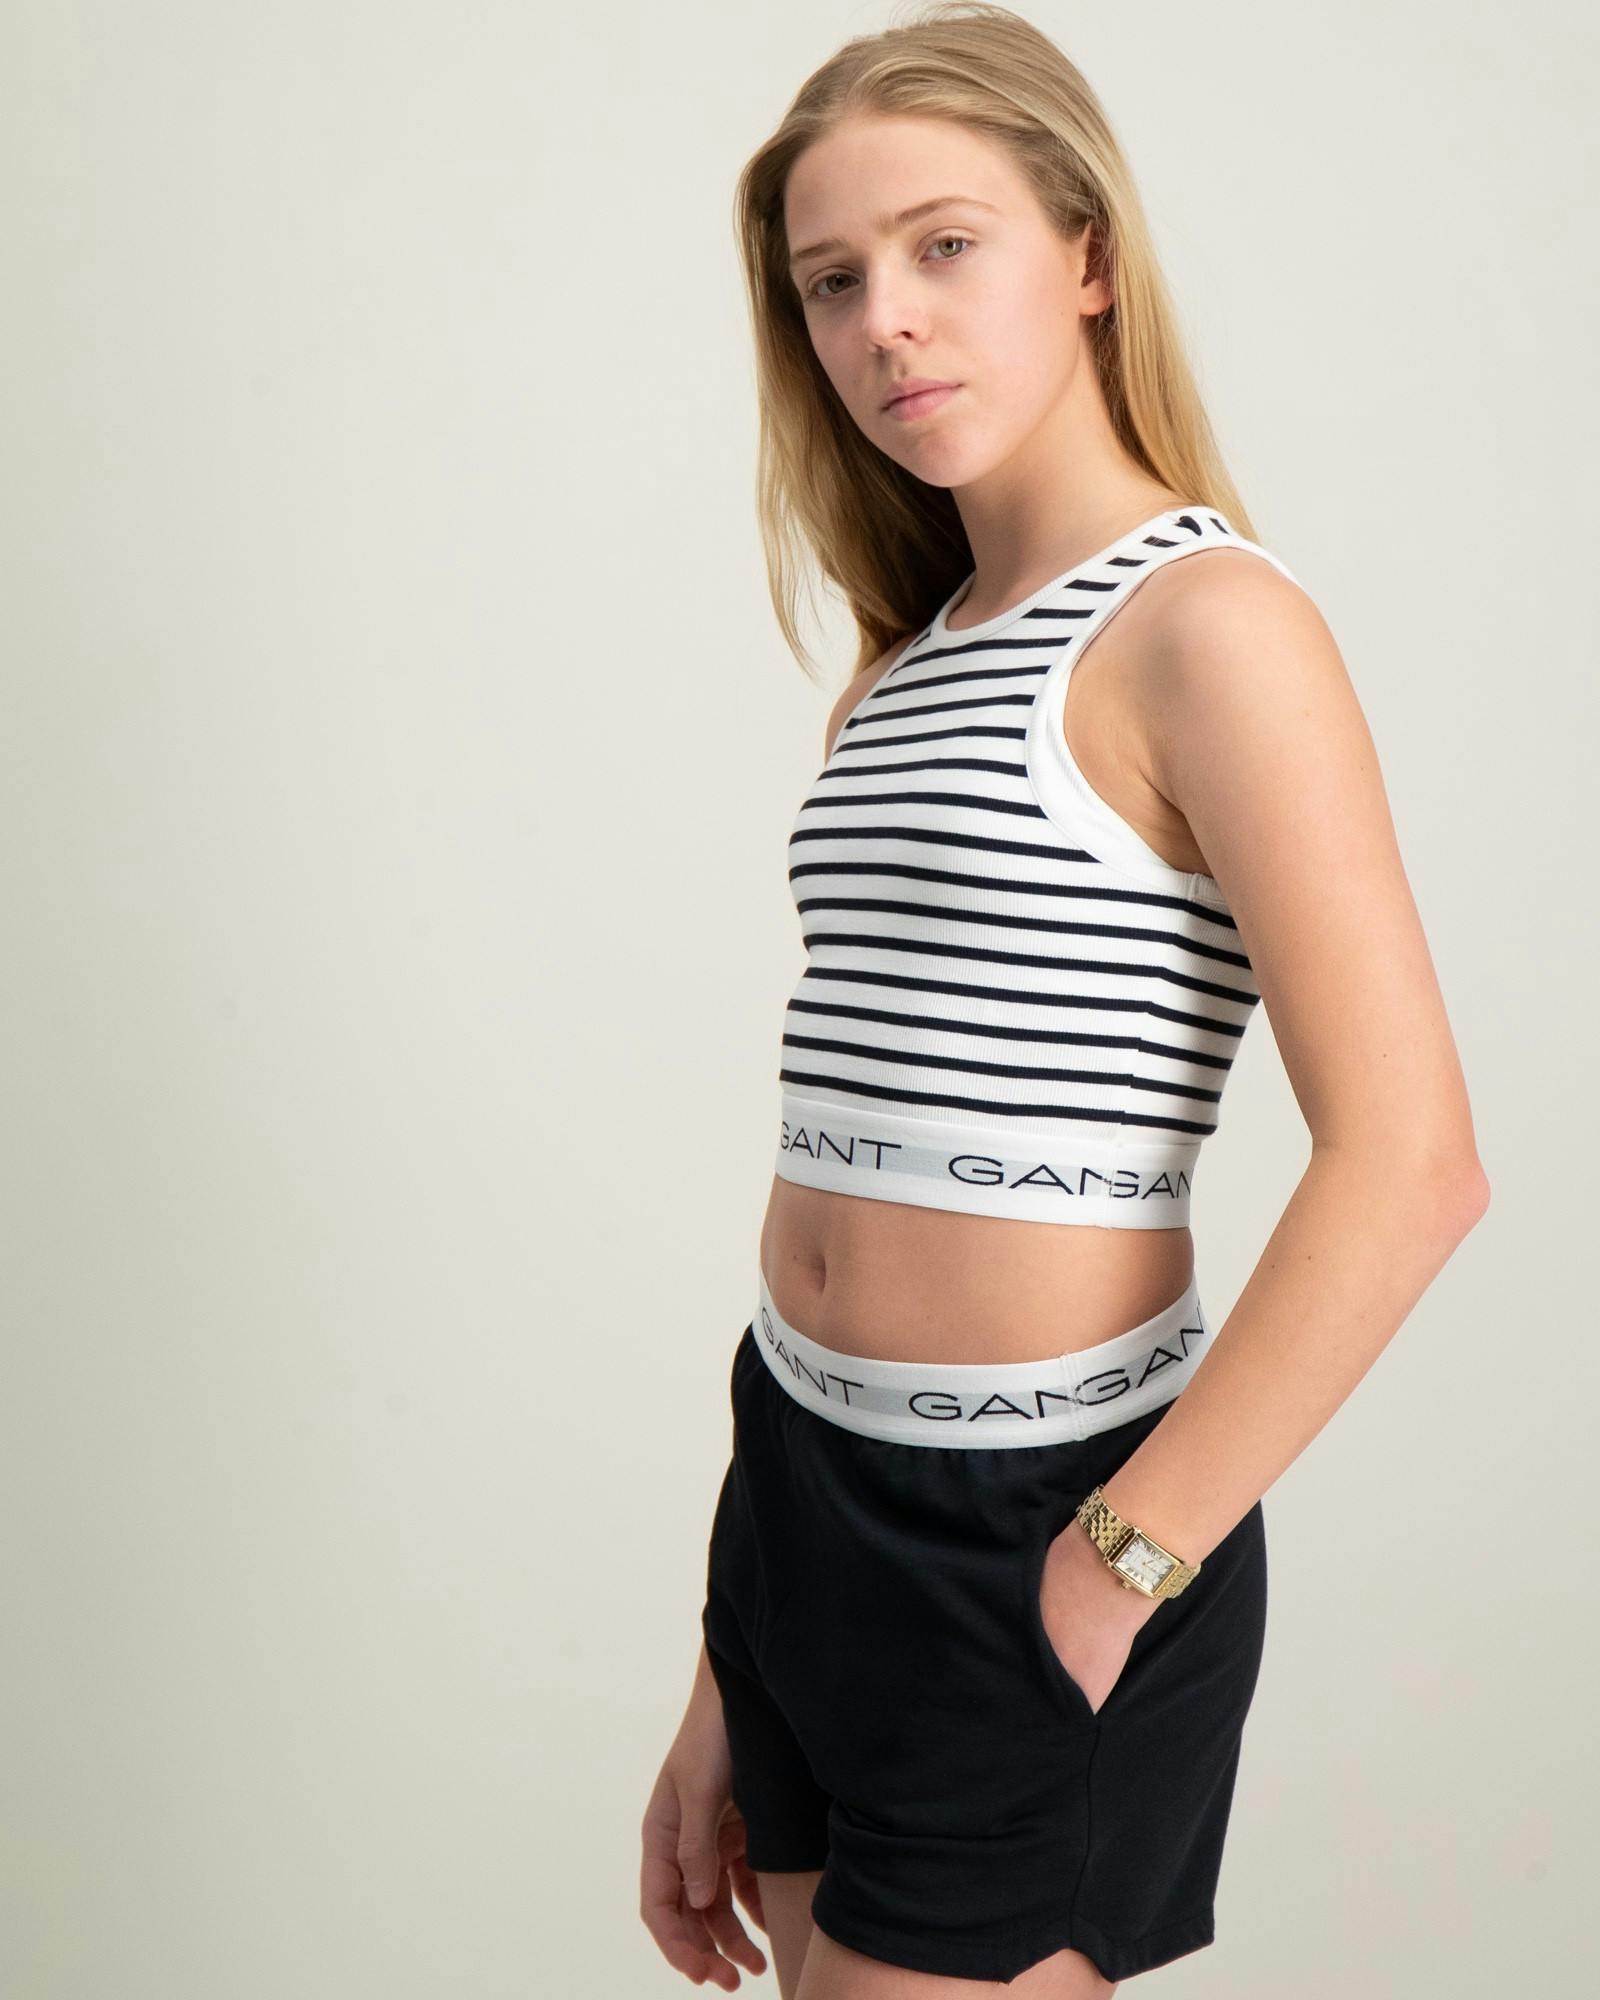 STRIPED RIBBED TANK TOP